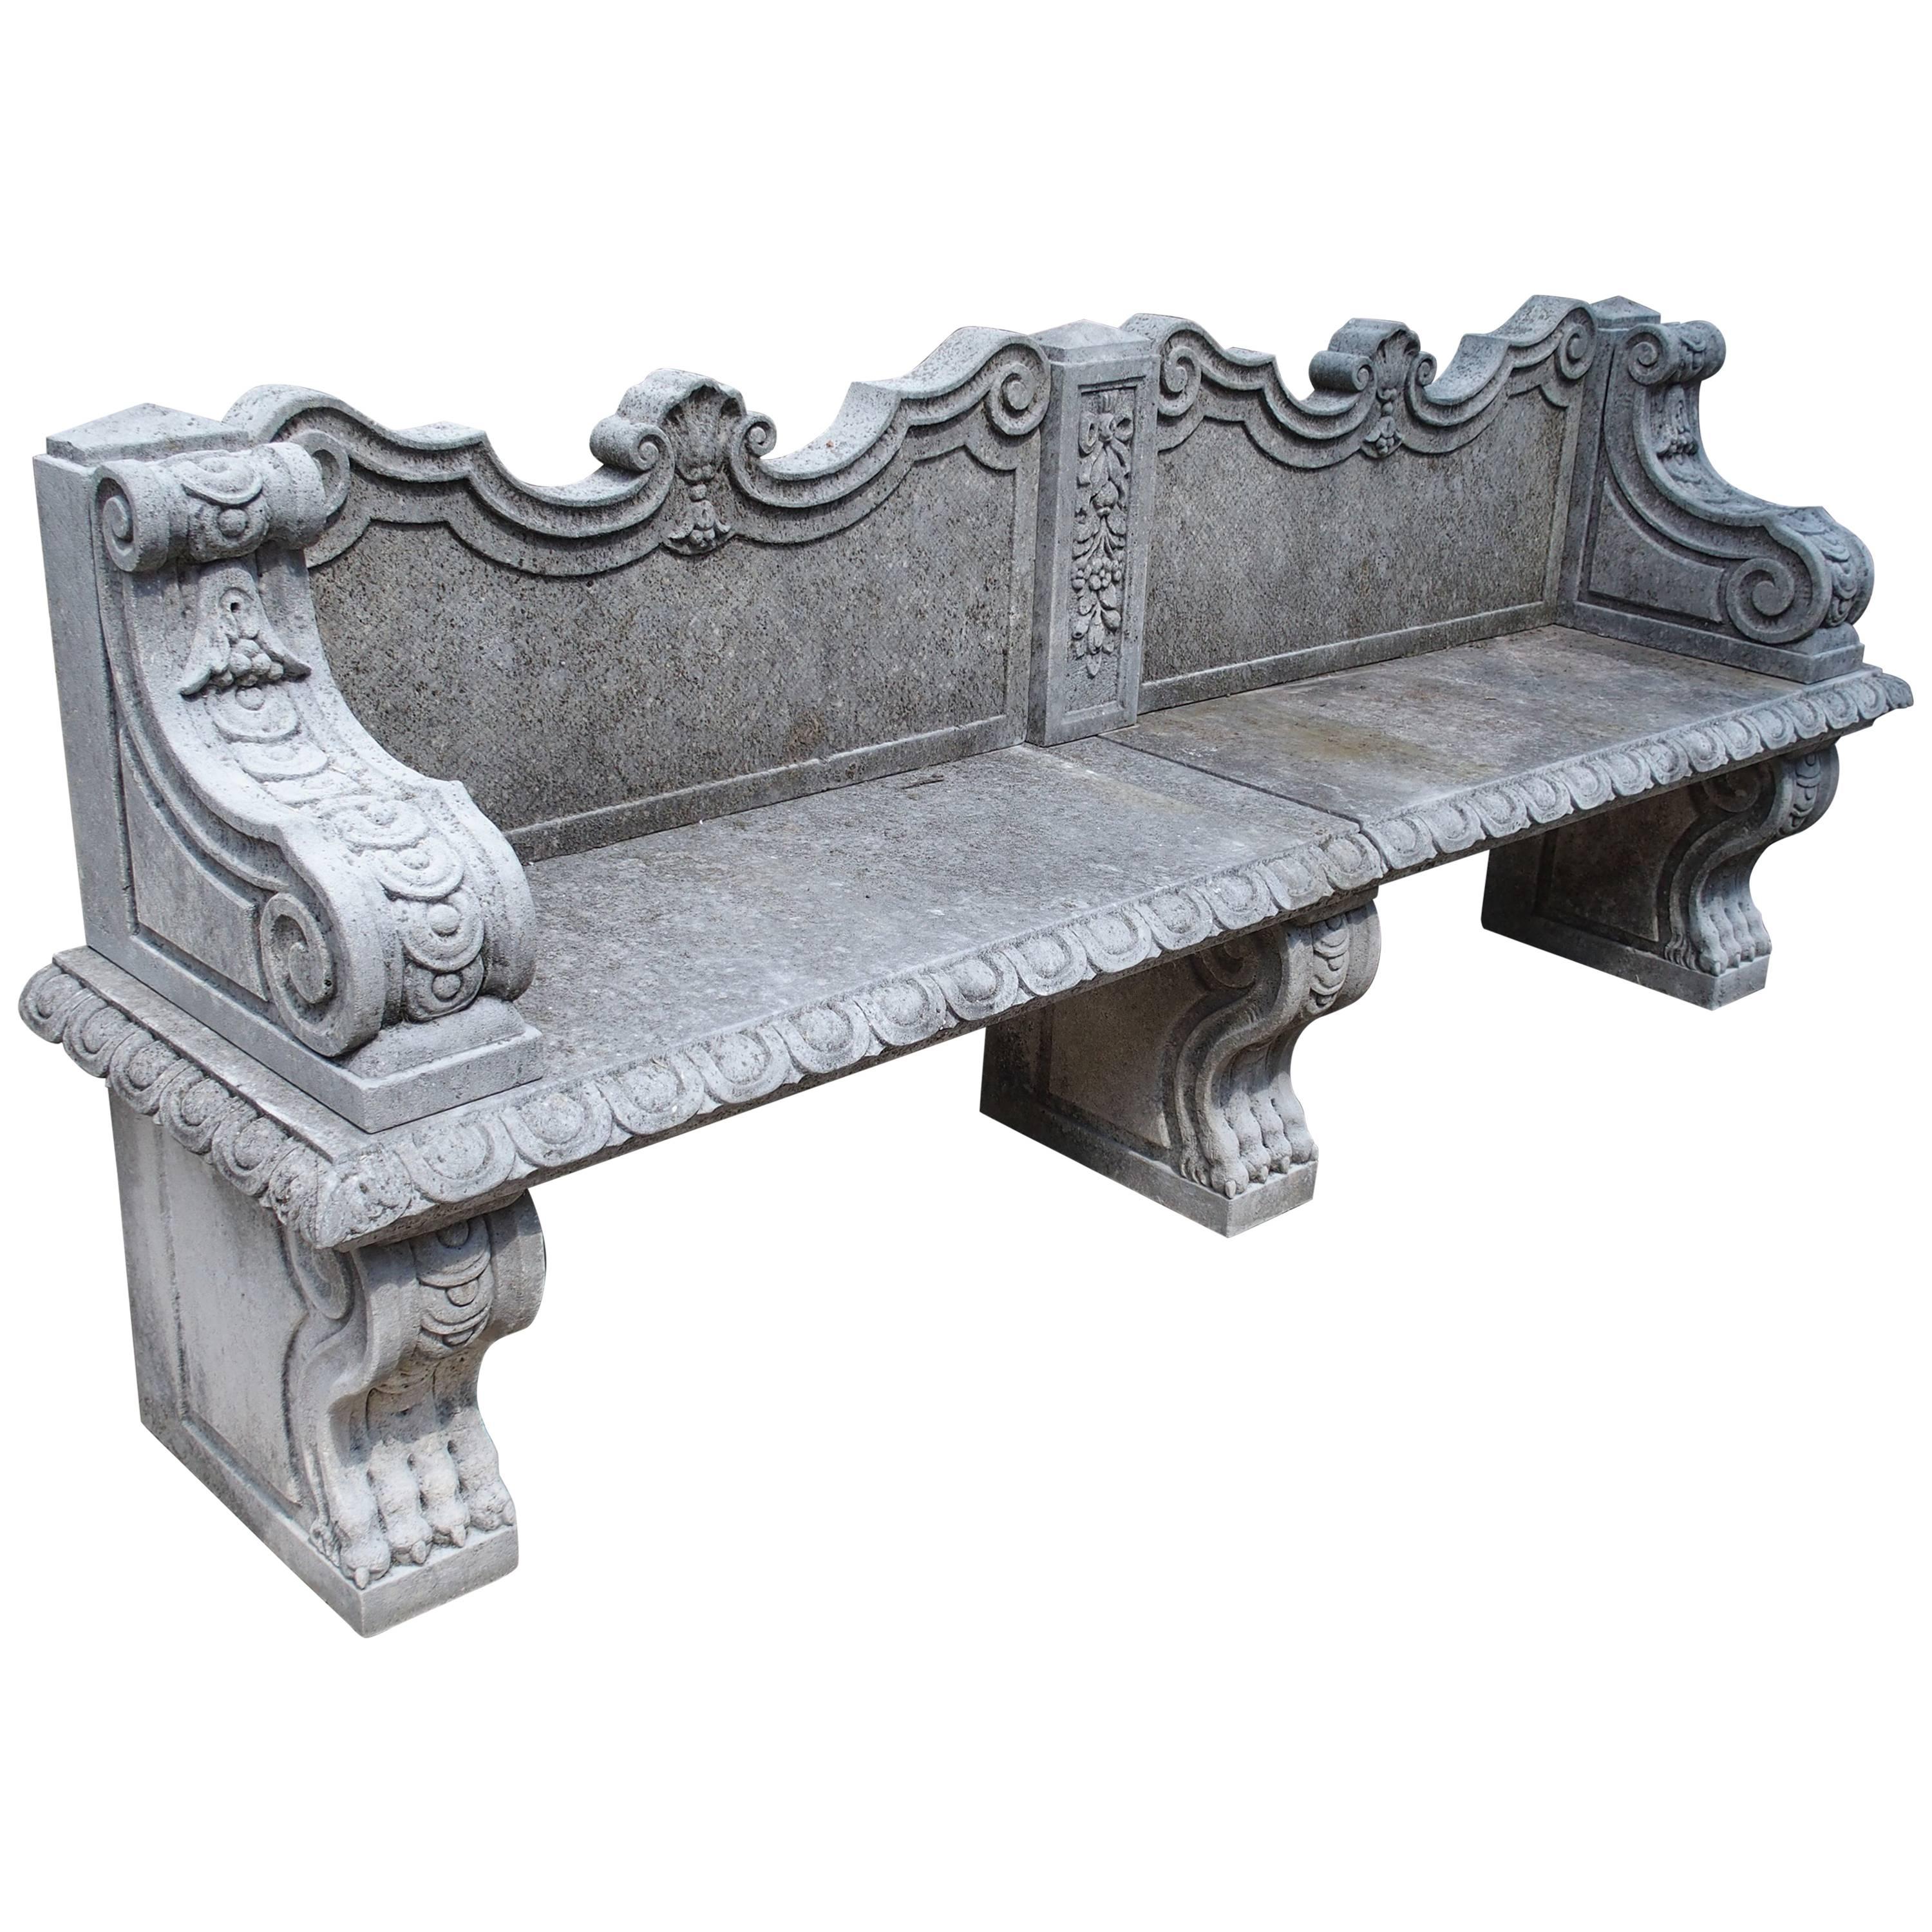 Carved Limestone Garden Bench from Northern Italy